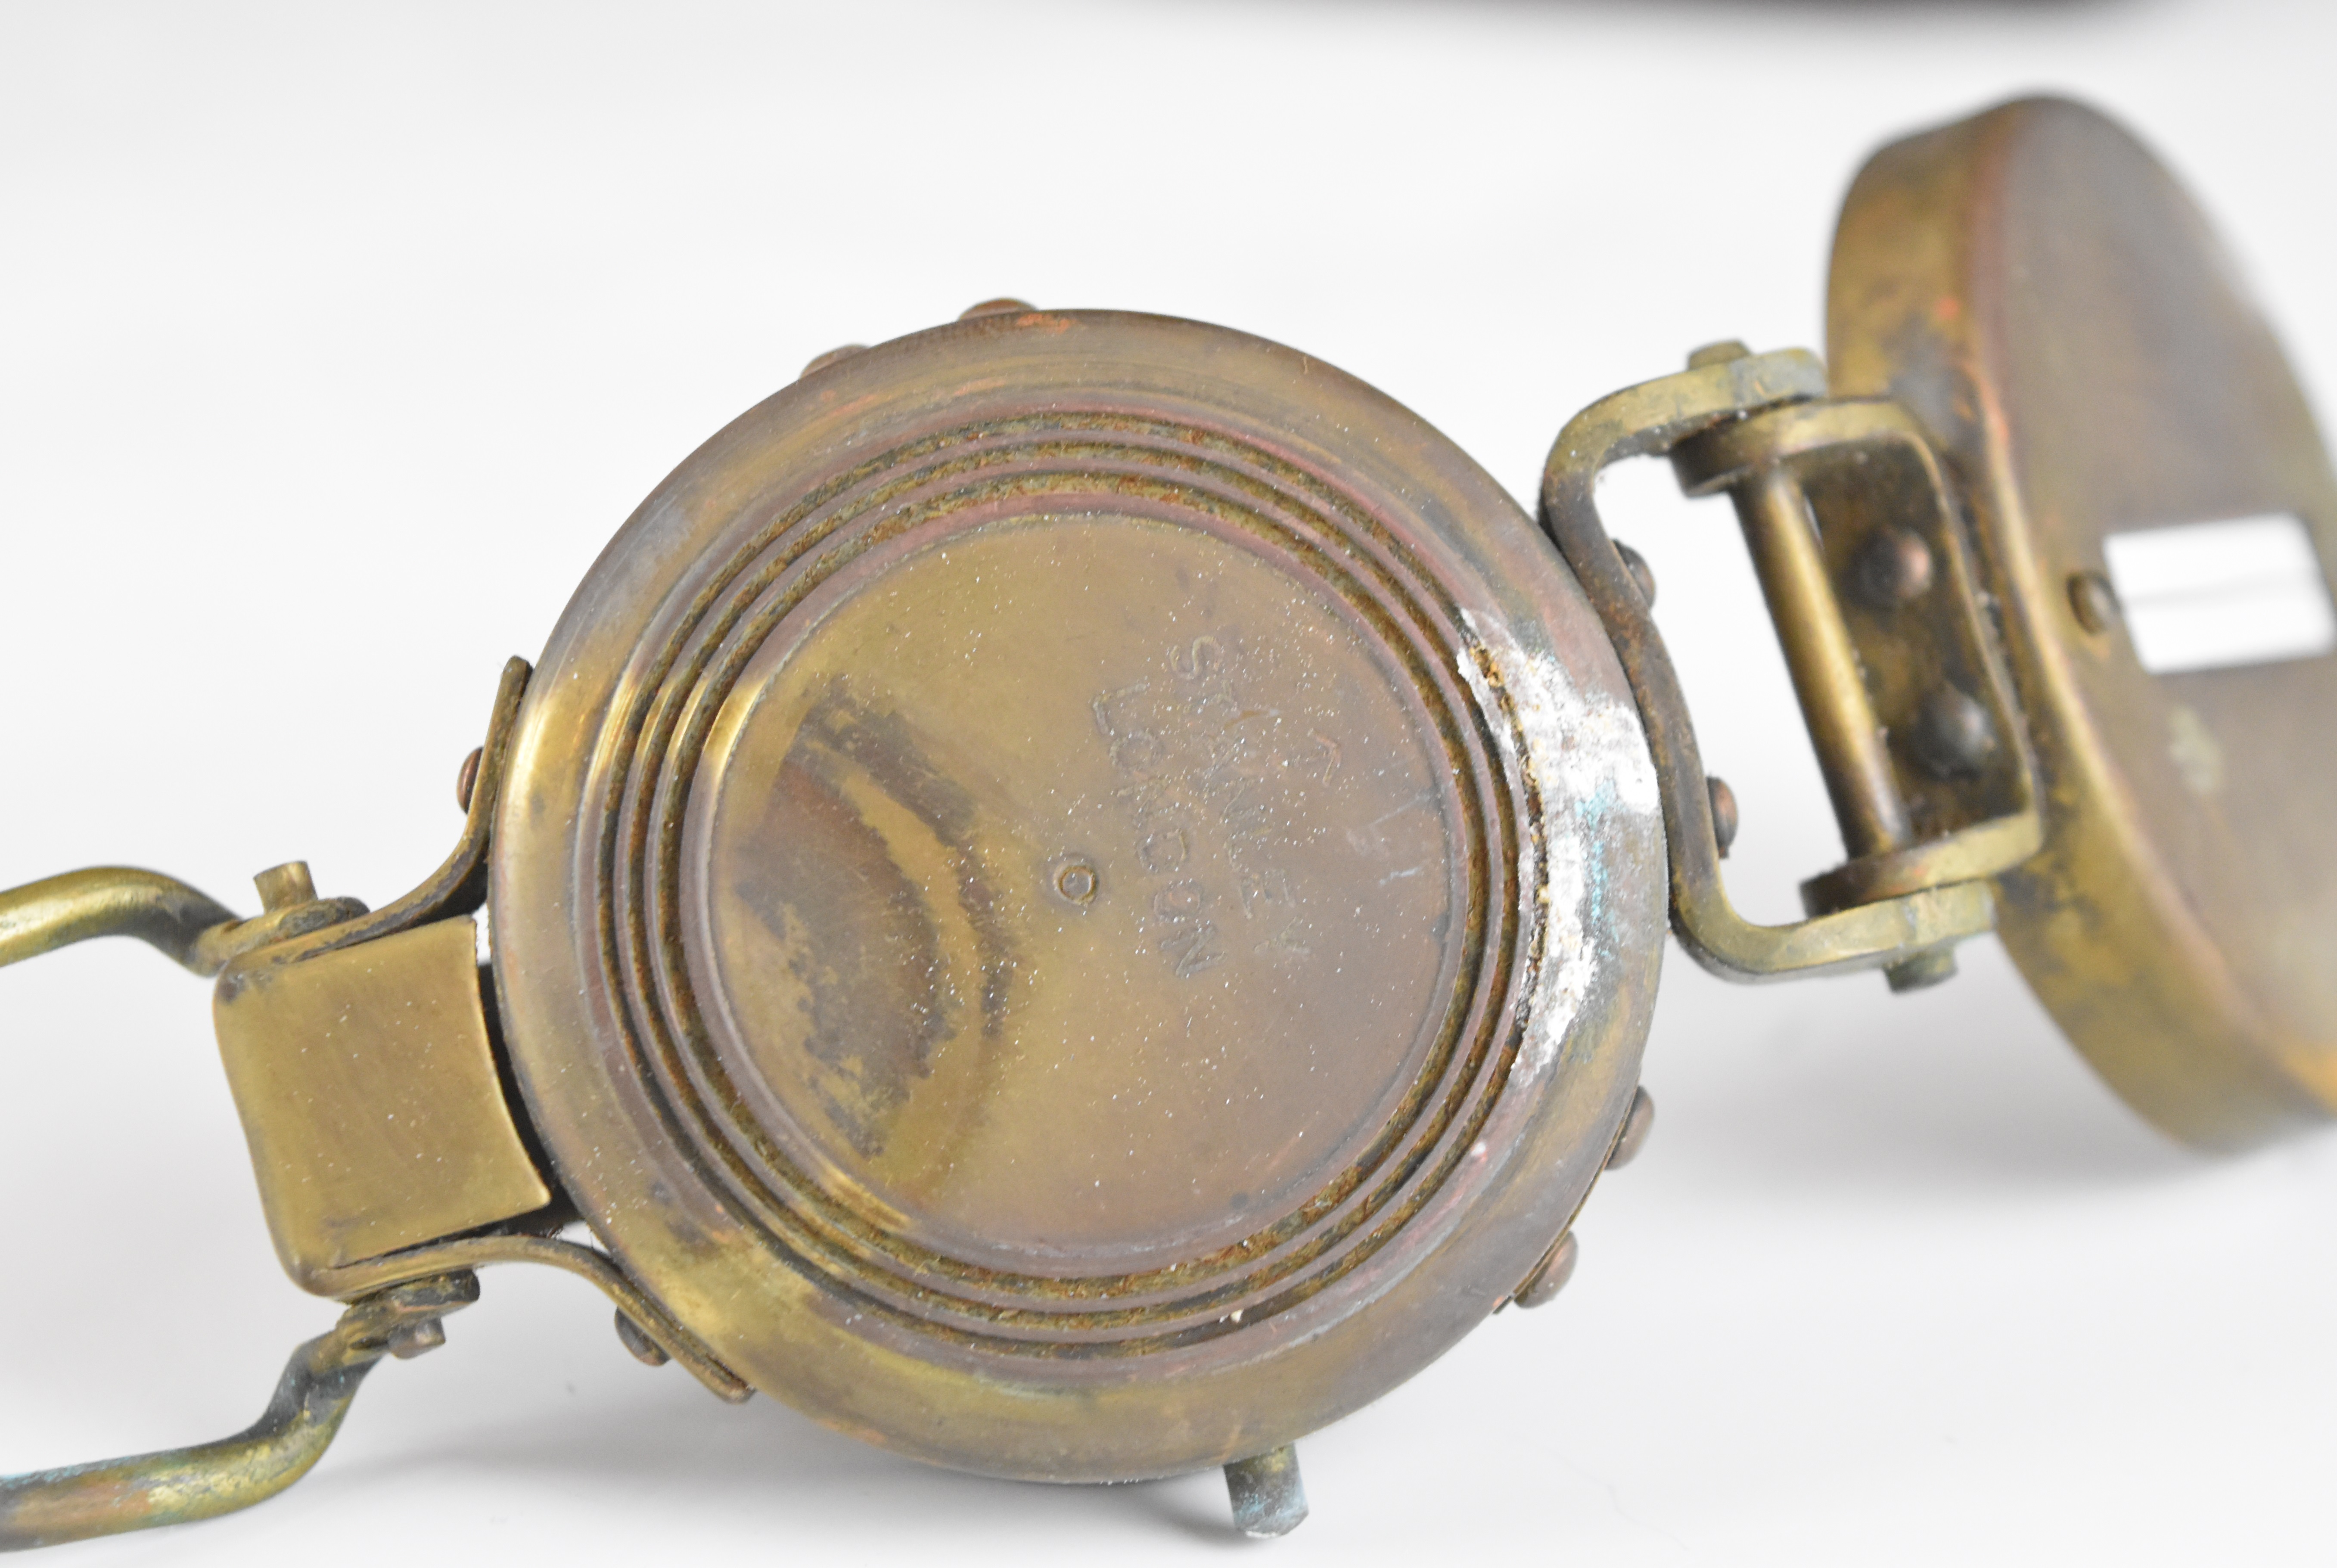 British WW2 prismatic compass by T G Co Ltd, London No B187104 1942 Mk III, with broad arrow mark, - Image 7 of 10